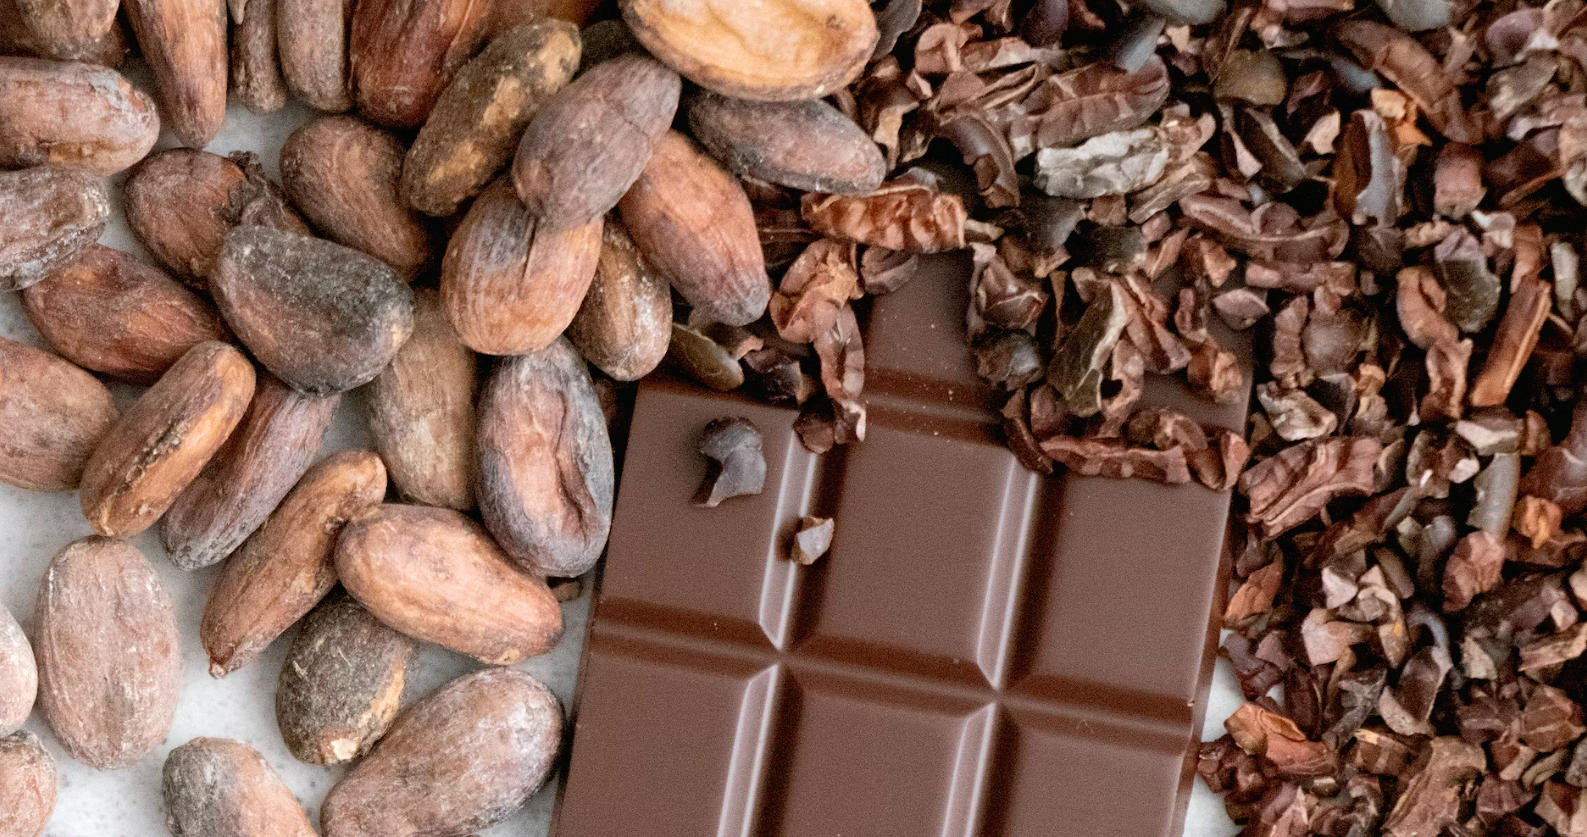 picture of cocoa beans, a chocolate bar, and cocoa nibs